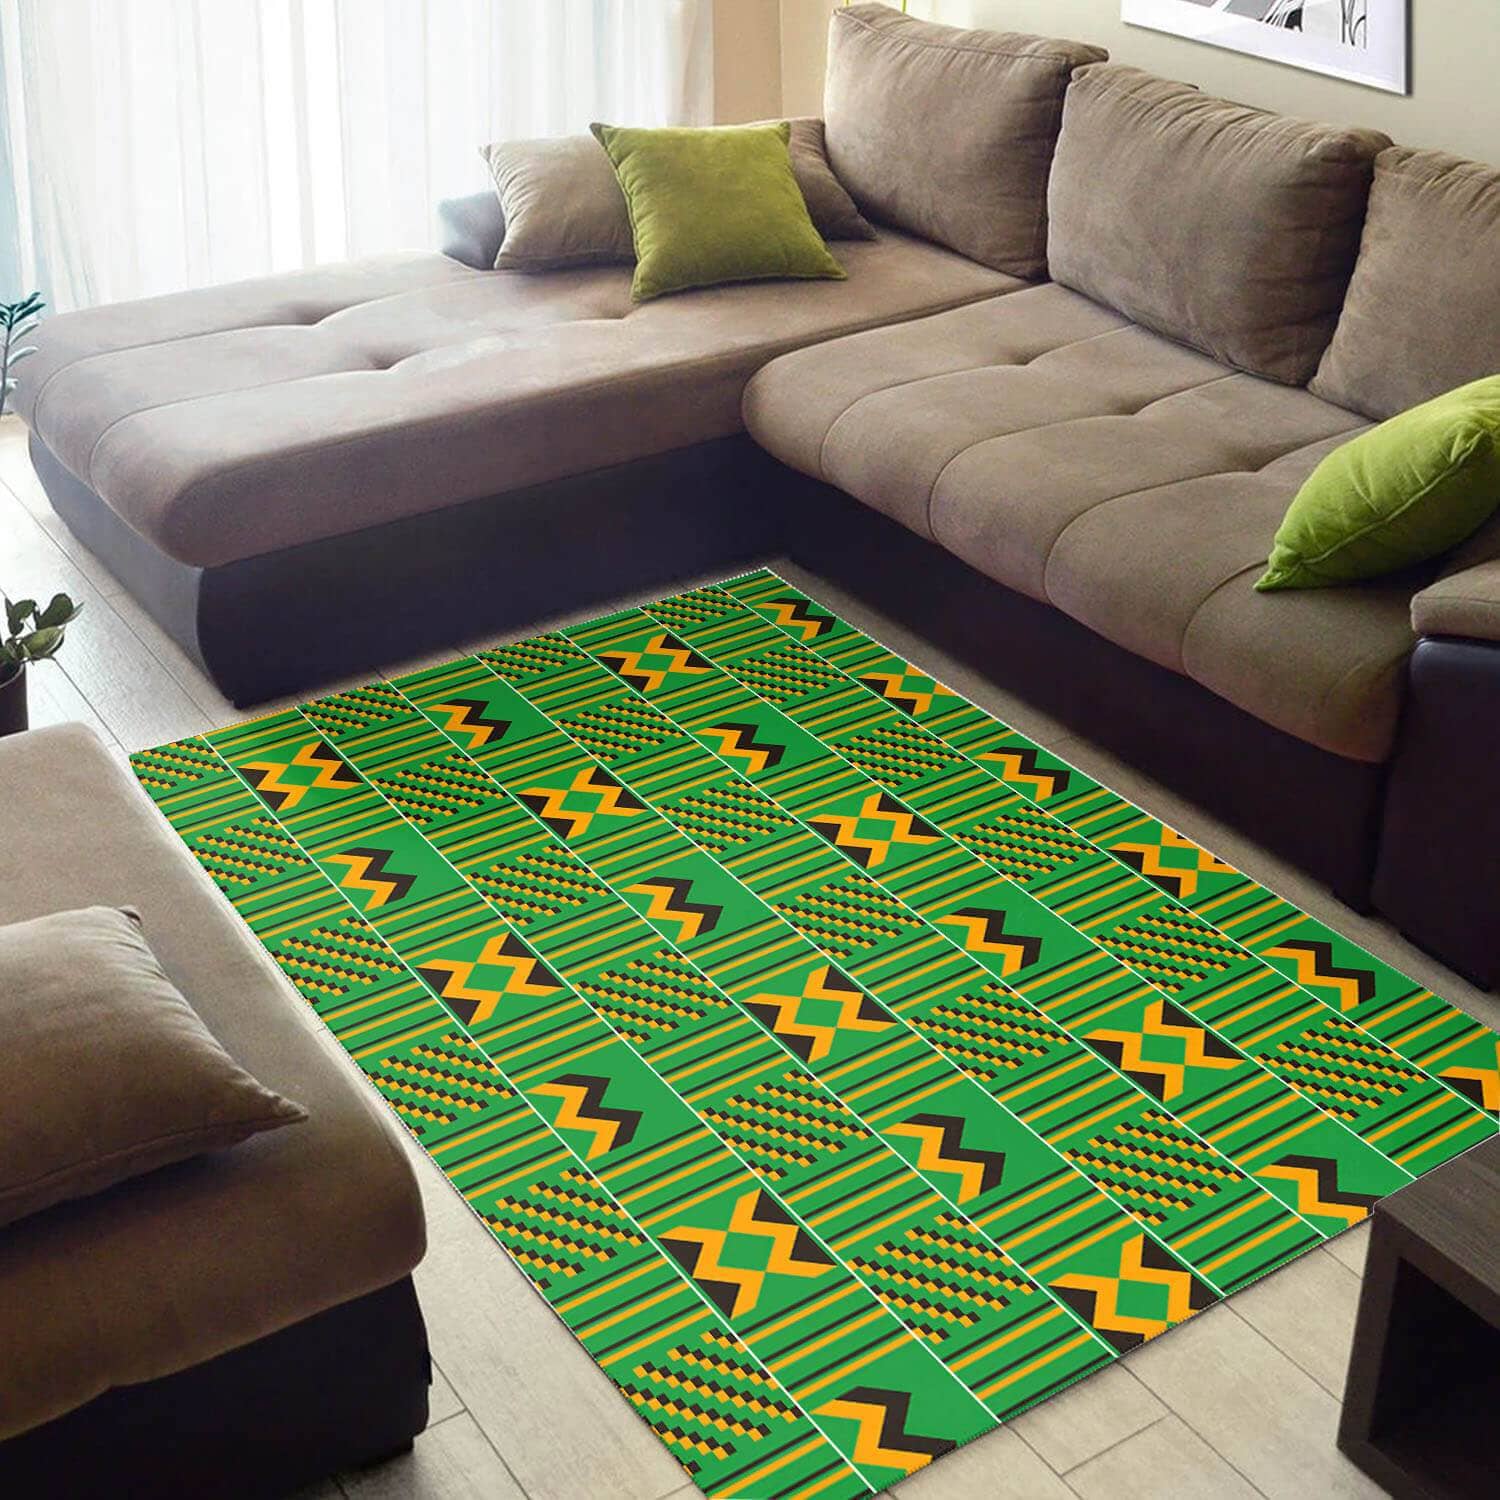 Inspired African Style Unique Afro American Afrocentric Pattern Art Design Floor Carpet House Rug